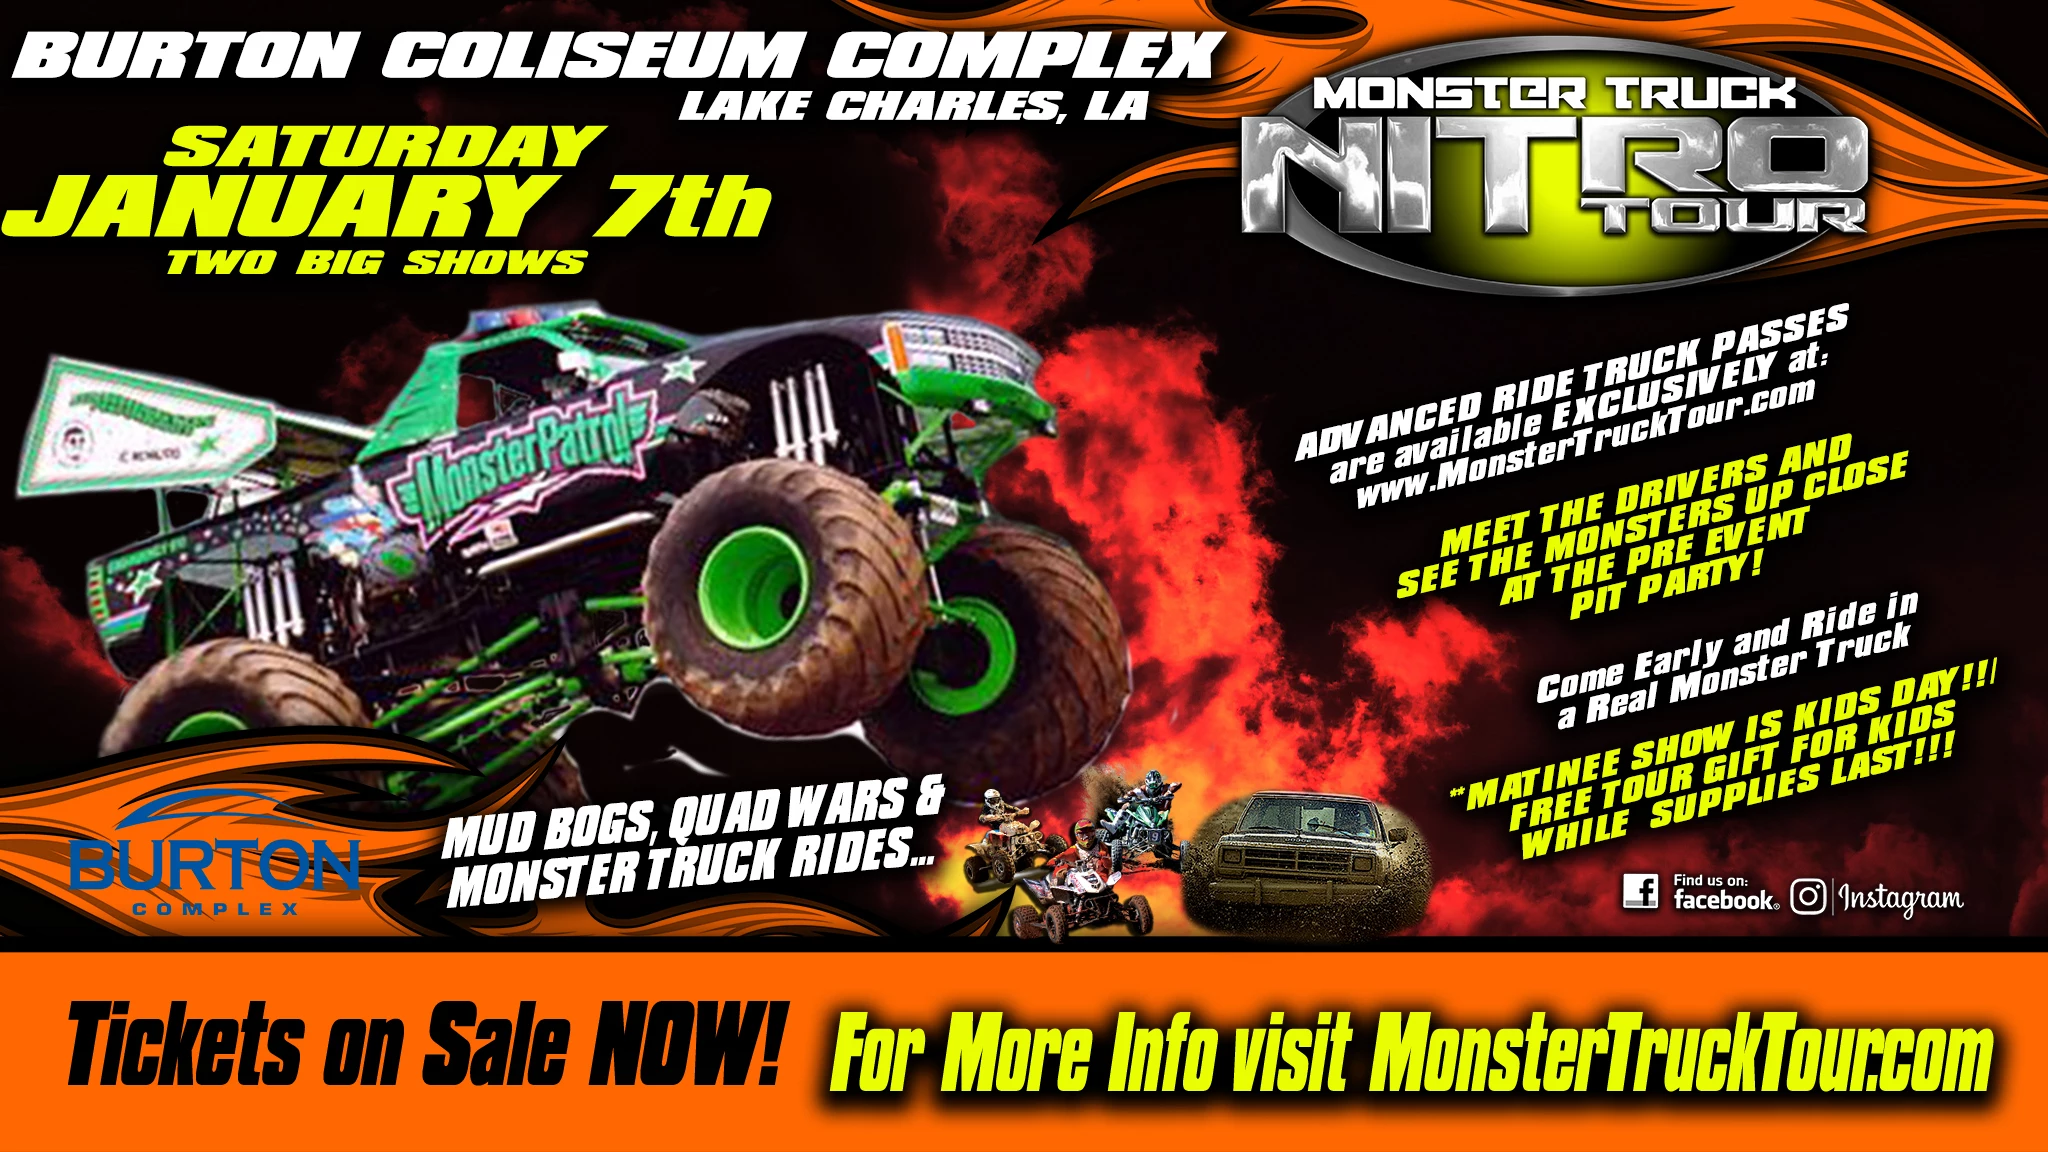 Win Tickets to the Monster Truck Nitro Tour!